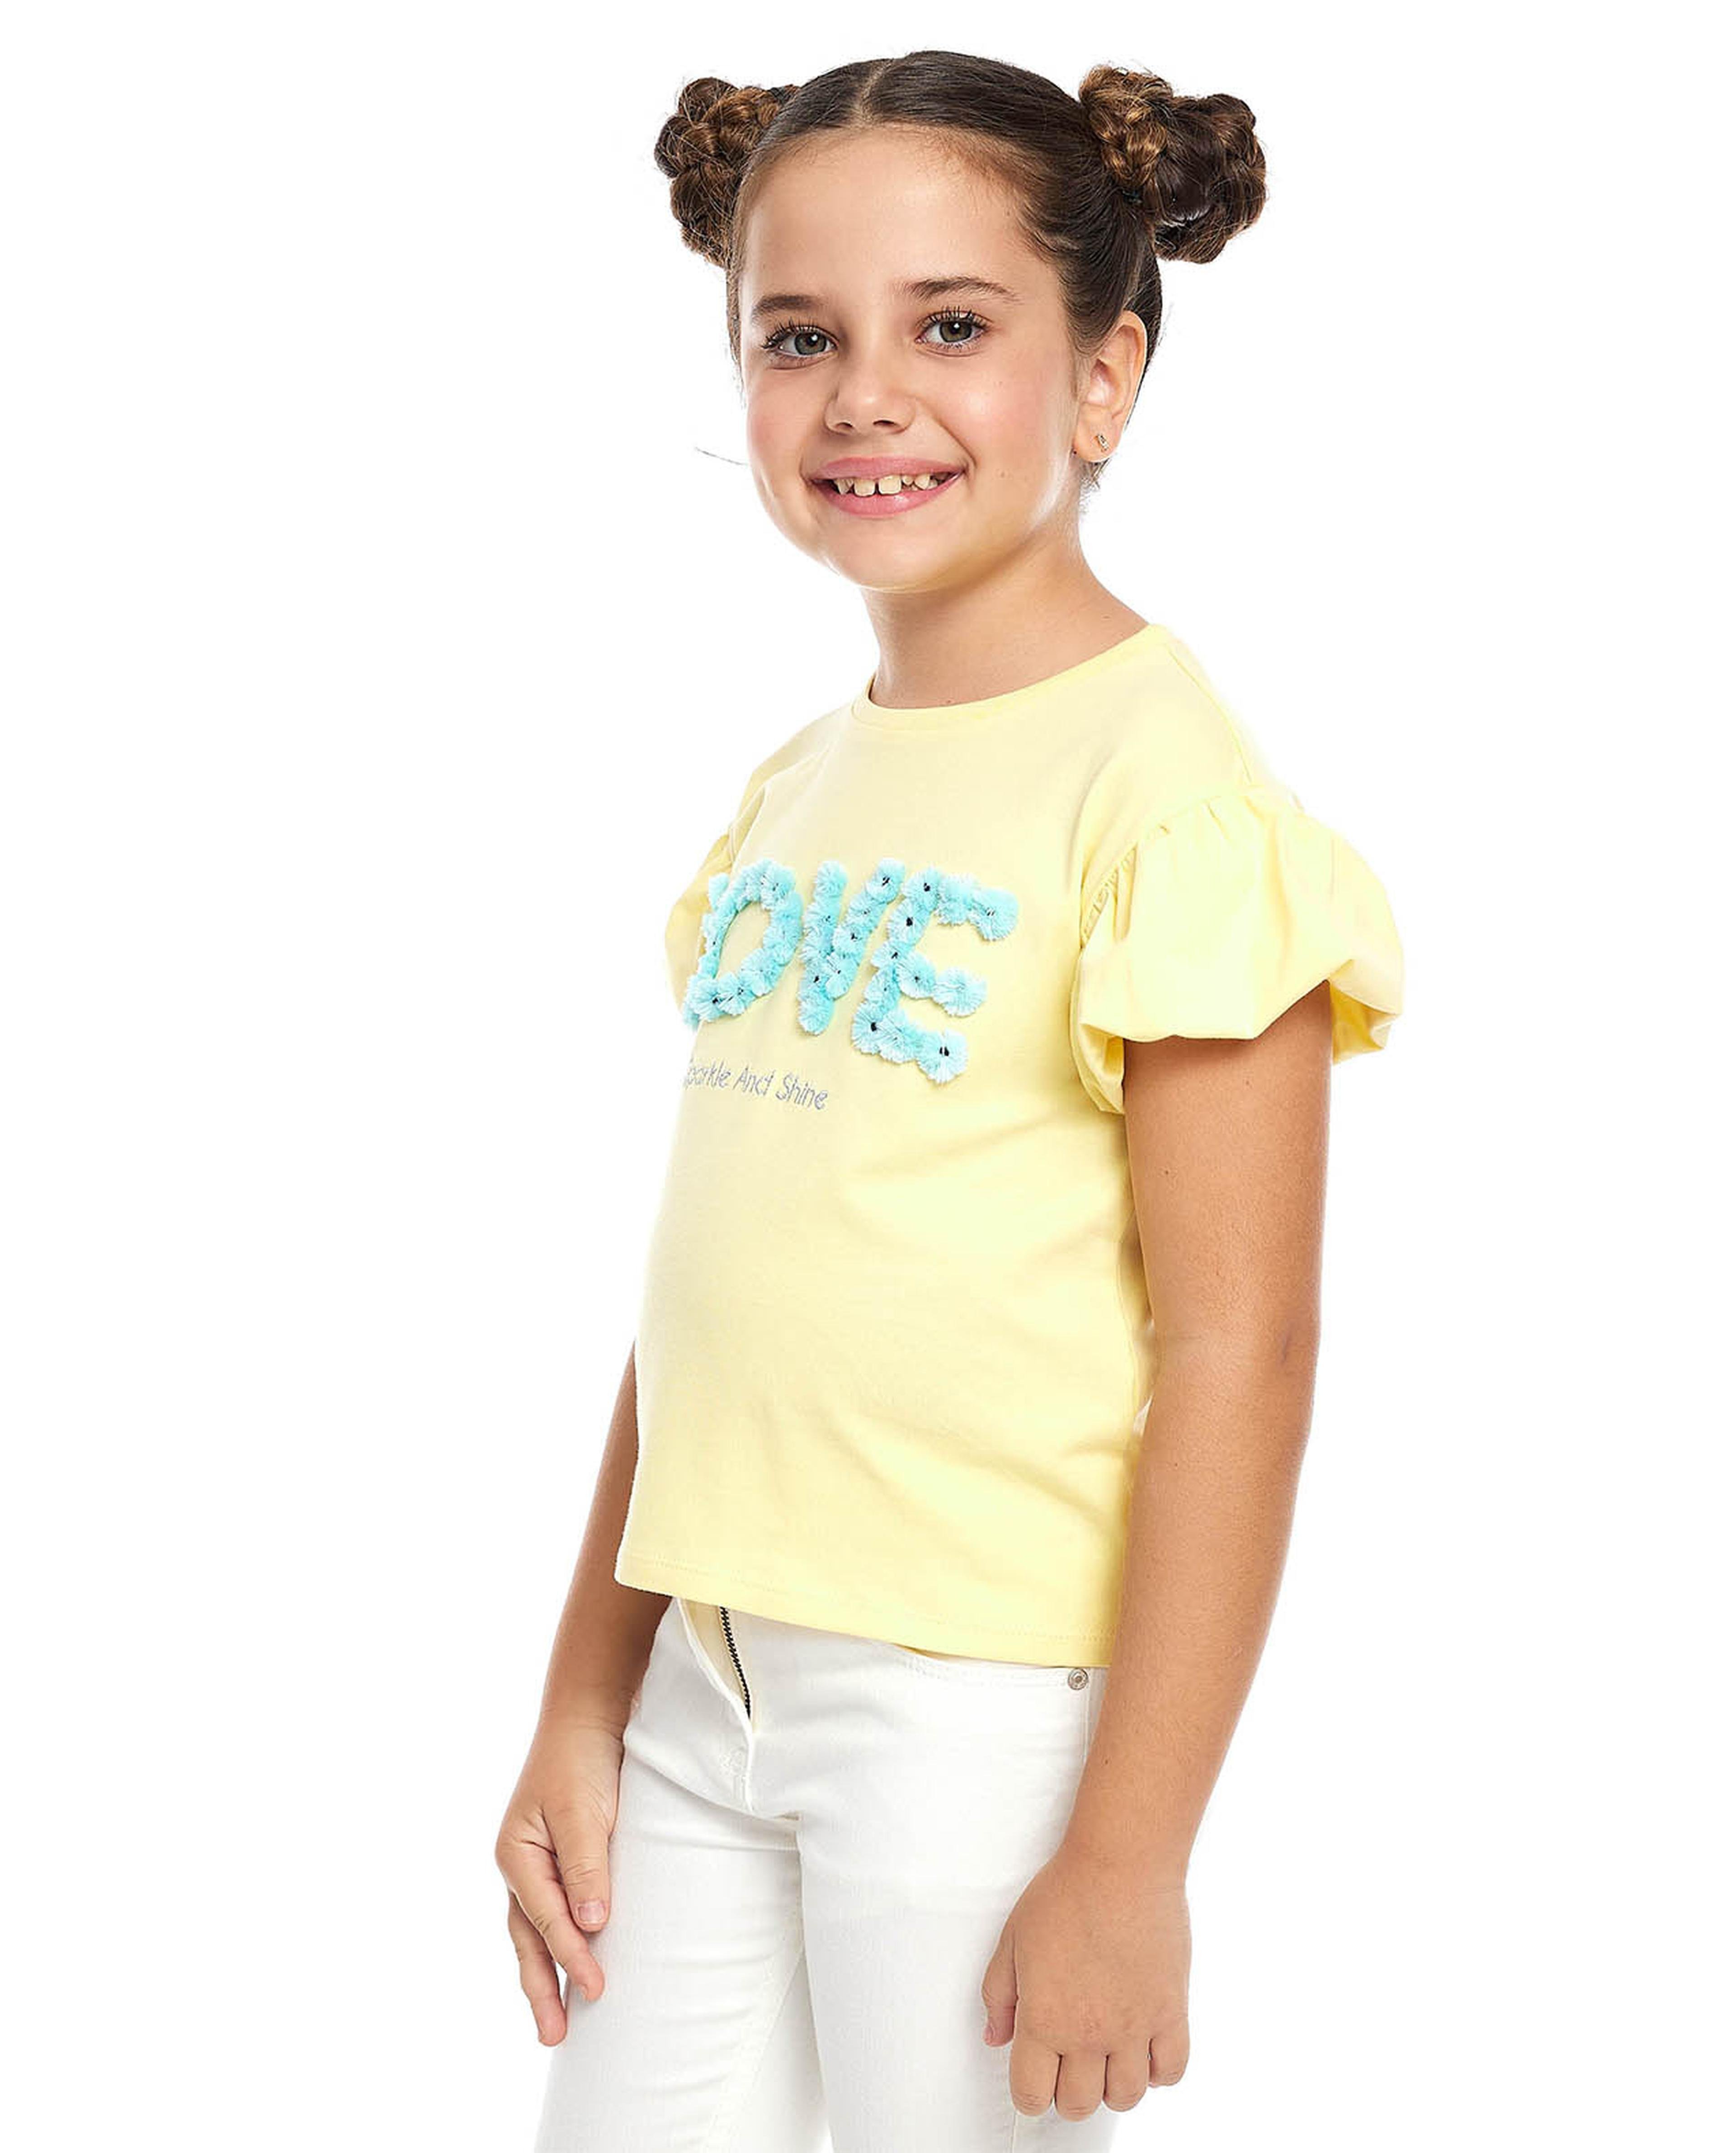 3D Applique Top with Crew Neck and Puff Sleeves